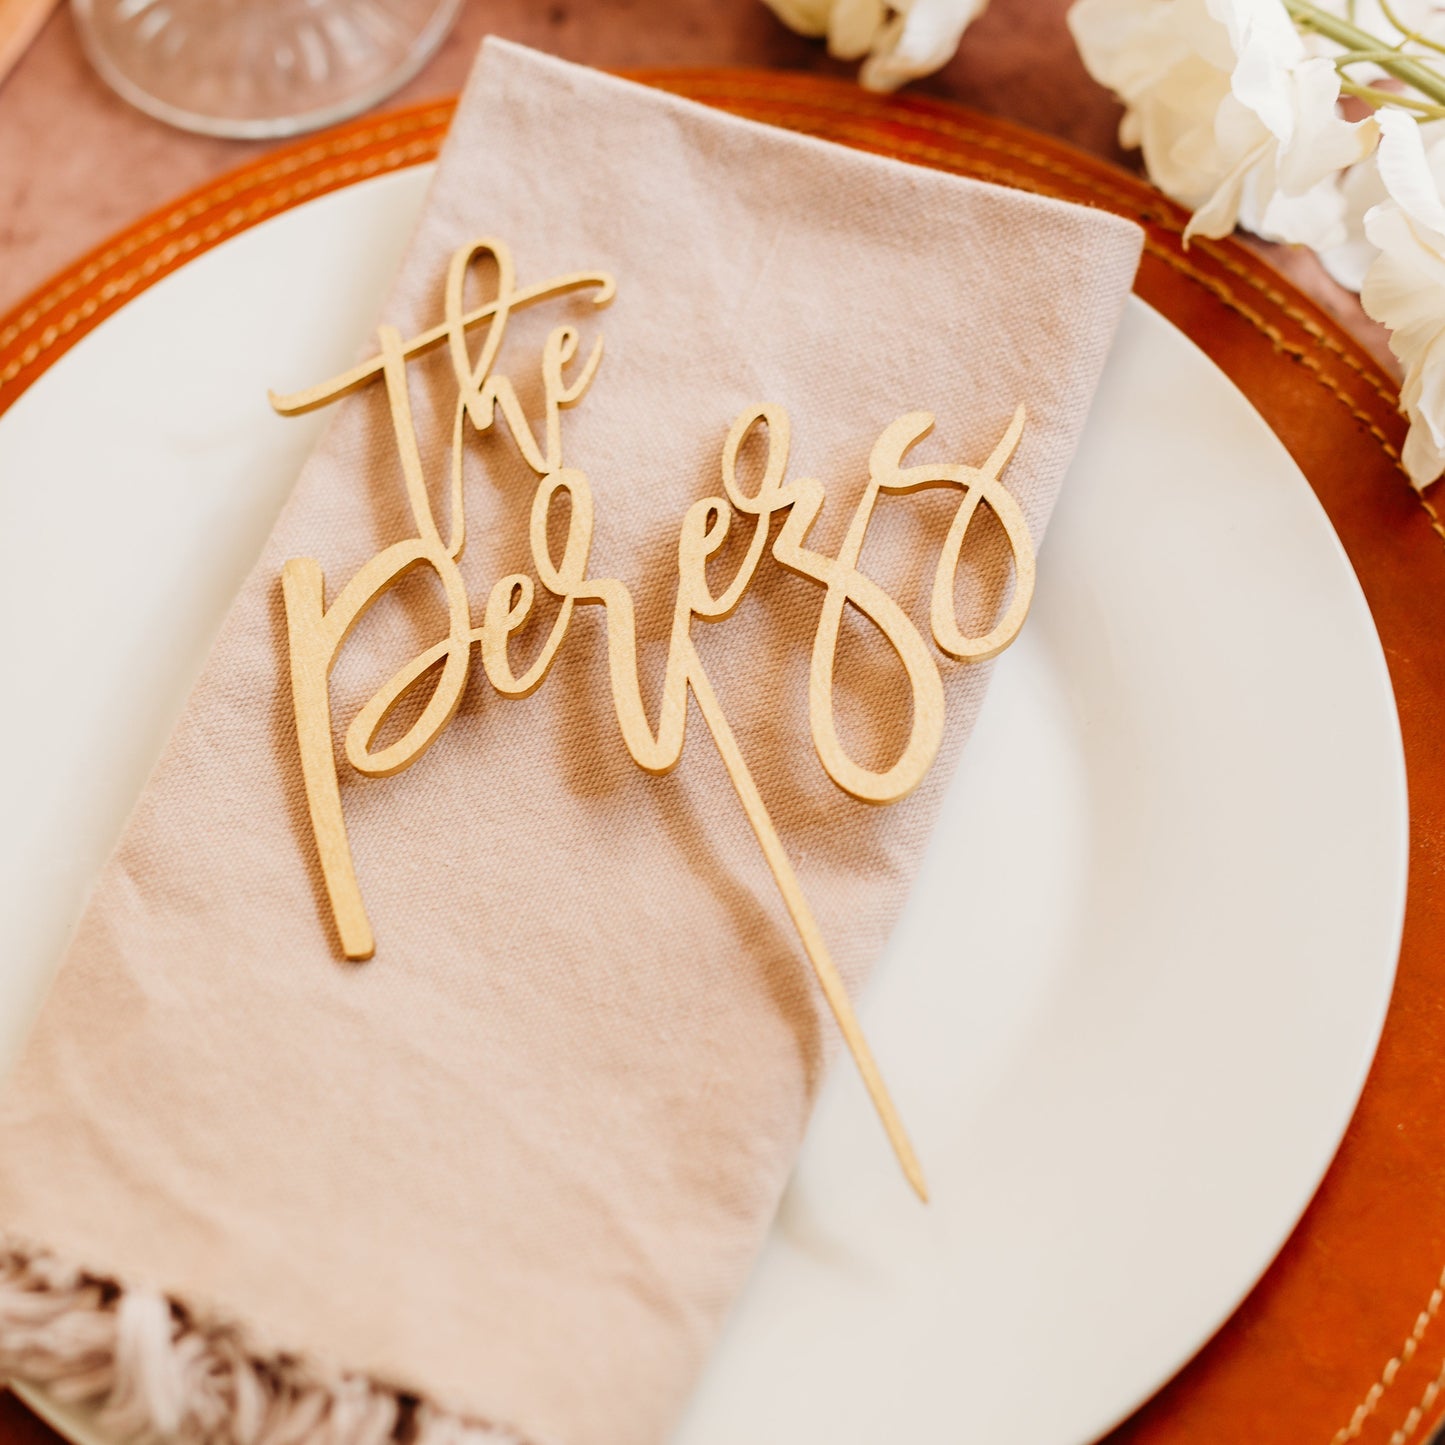 Modern script gold wood wedding cake topper custom cake toppers wedding personalized acrylic cake modern decor minimalist cake topper custom rustic rustic wedding mr mrs cake topper caketopper personalized topper topper candy bar